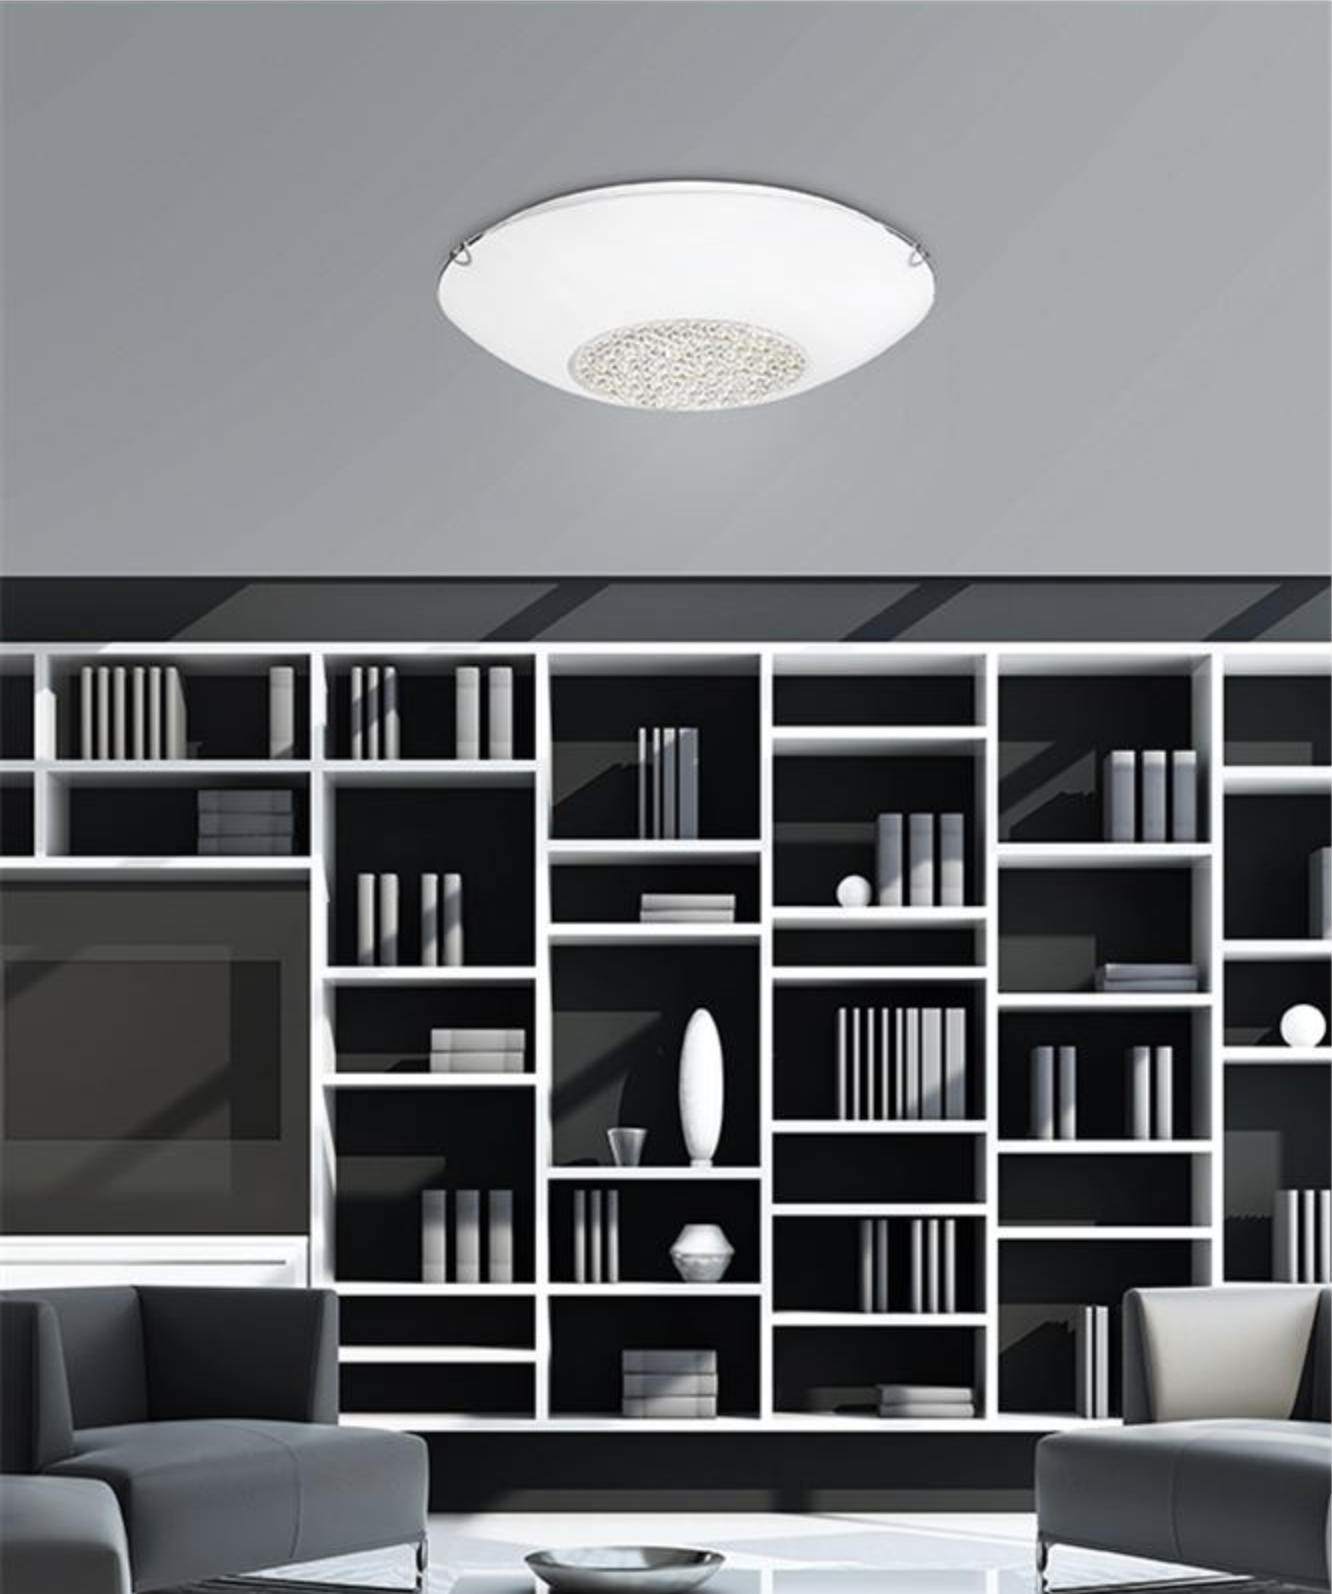 Small White Glass & Crystal Ceiling Light - ID 7488